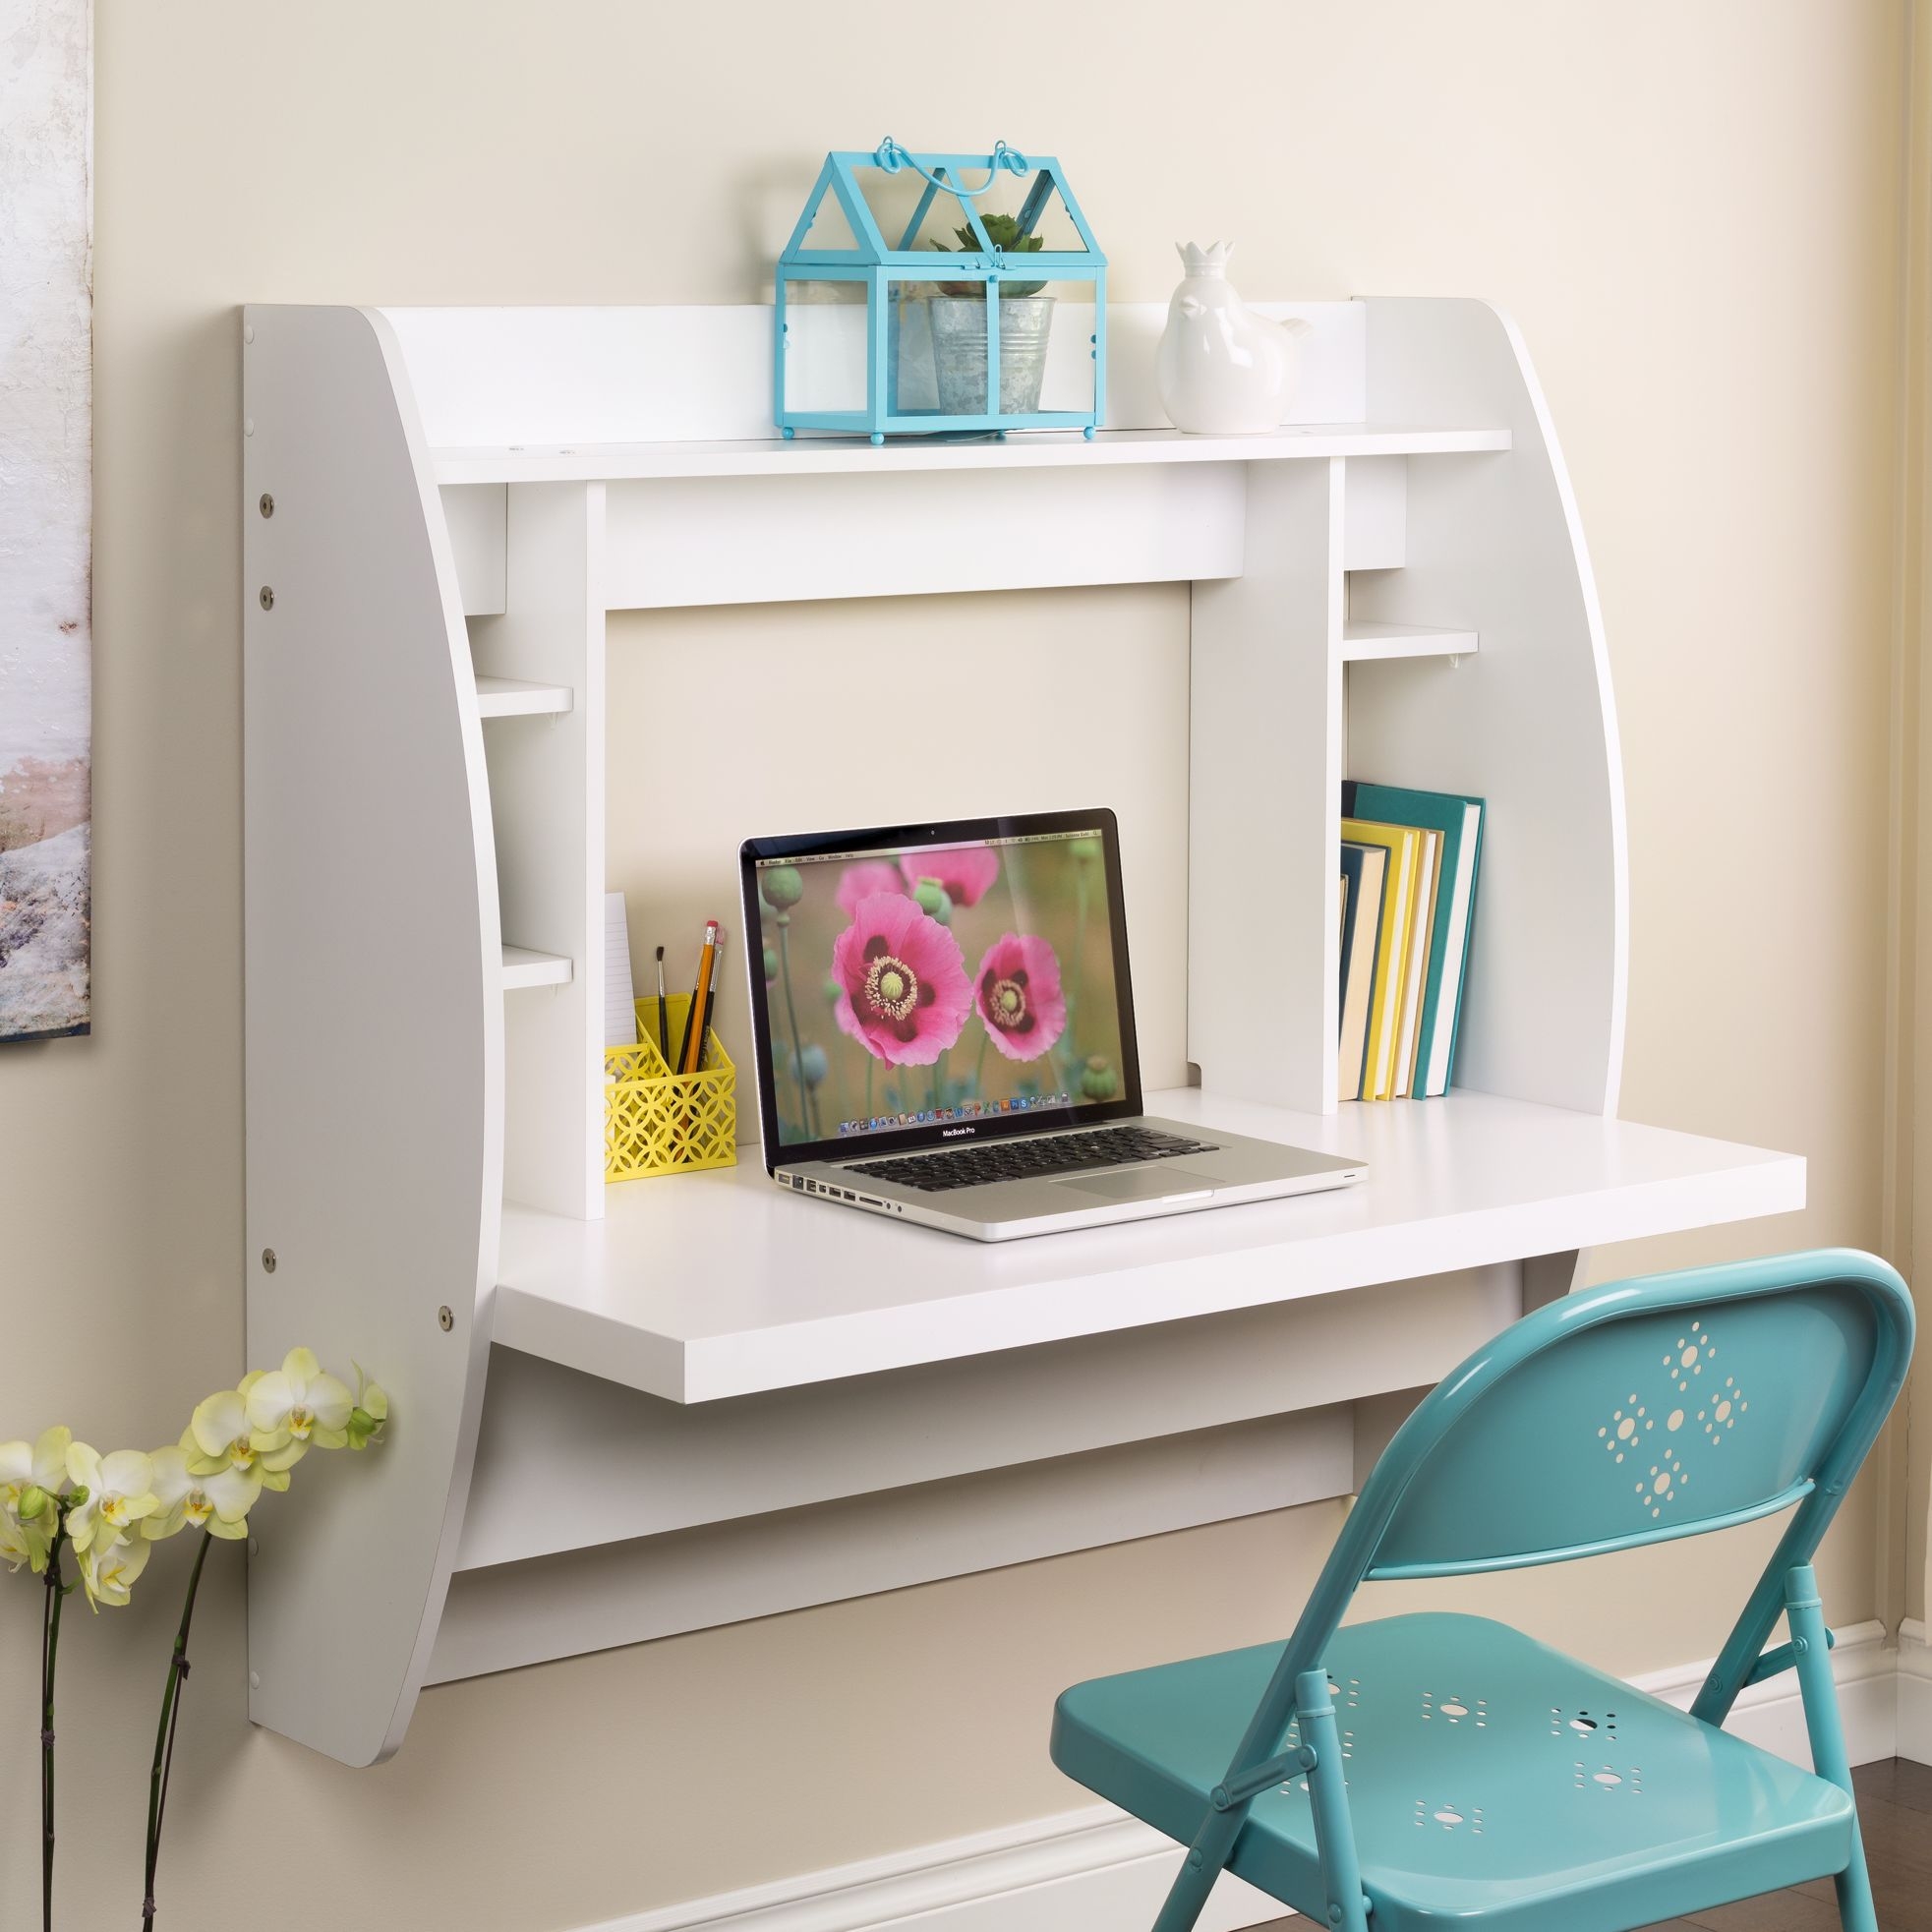 Wall Mounted Folding Desk Visualhunt, Pine Bookcase With Fold Down Desktop